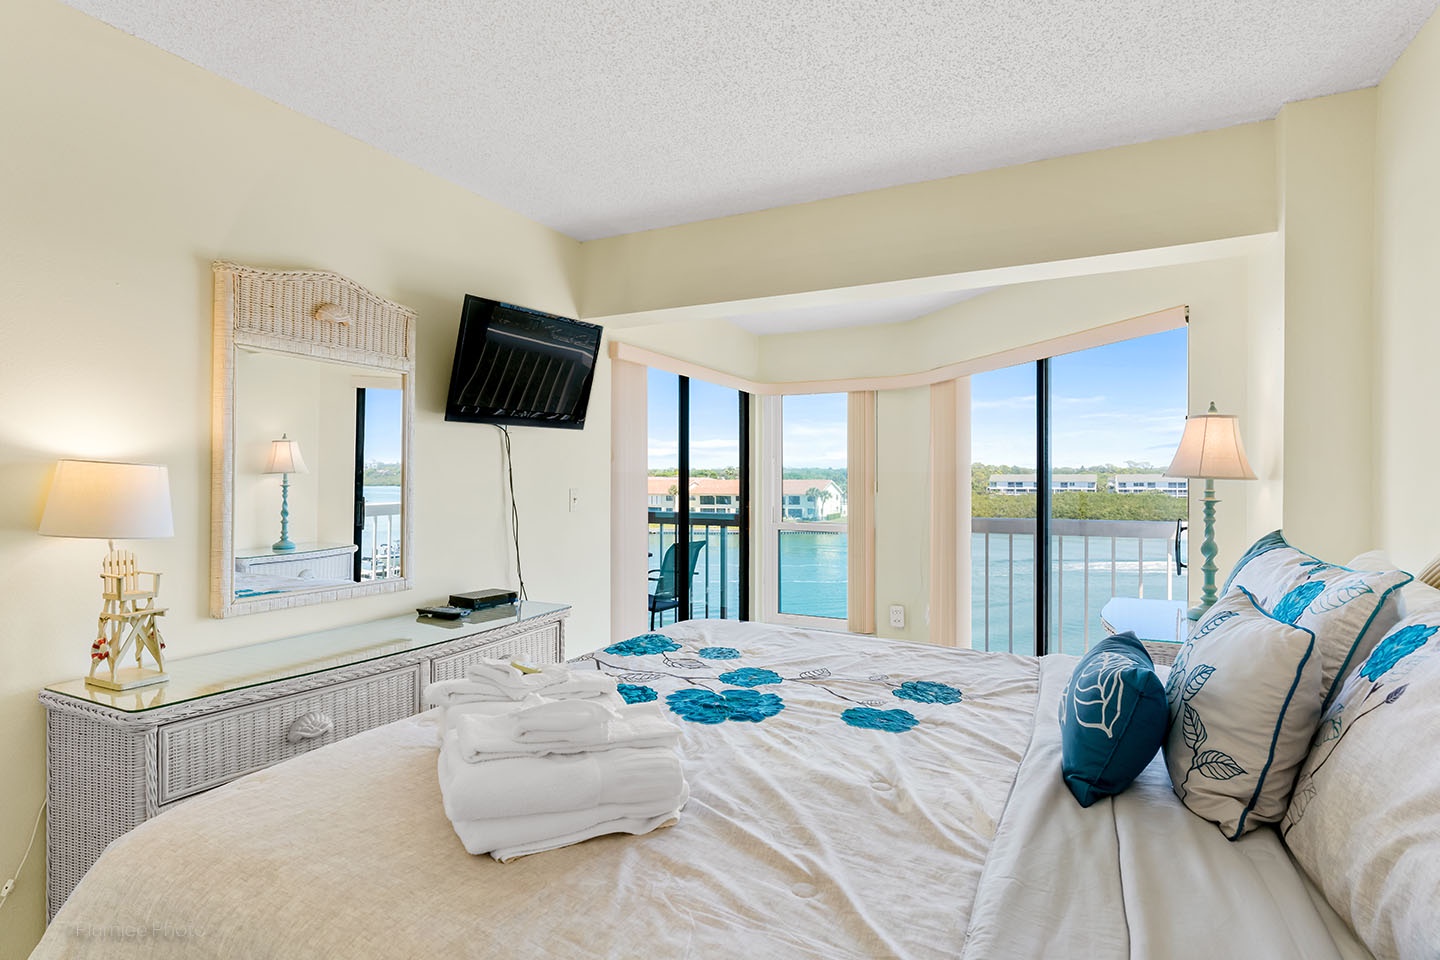 The master bedroom has access to the main balcony and a private corner balcony.